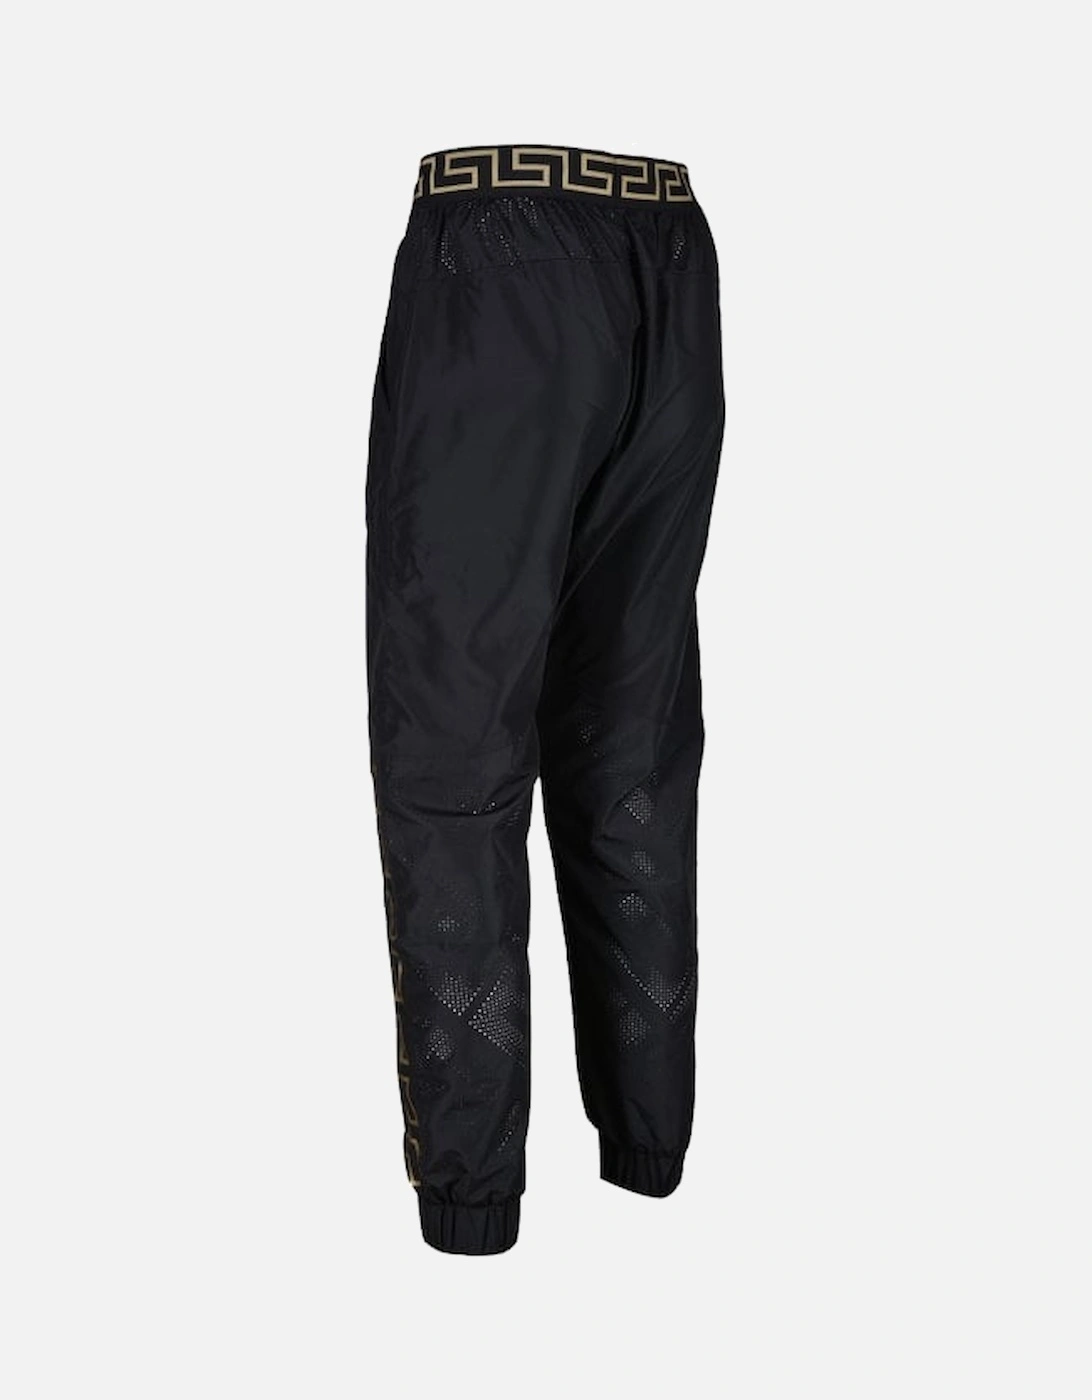 Iconic Logo Tape Technical Gym Jogging Bottoms, Black/gold